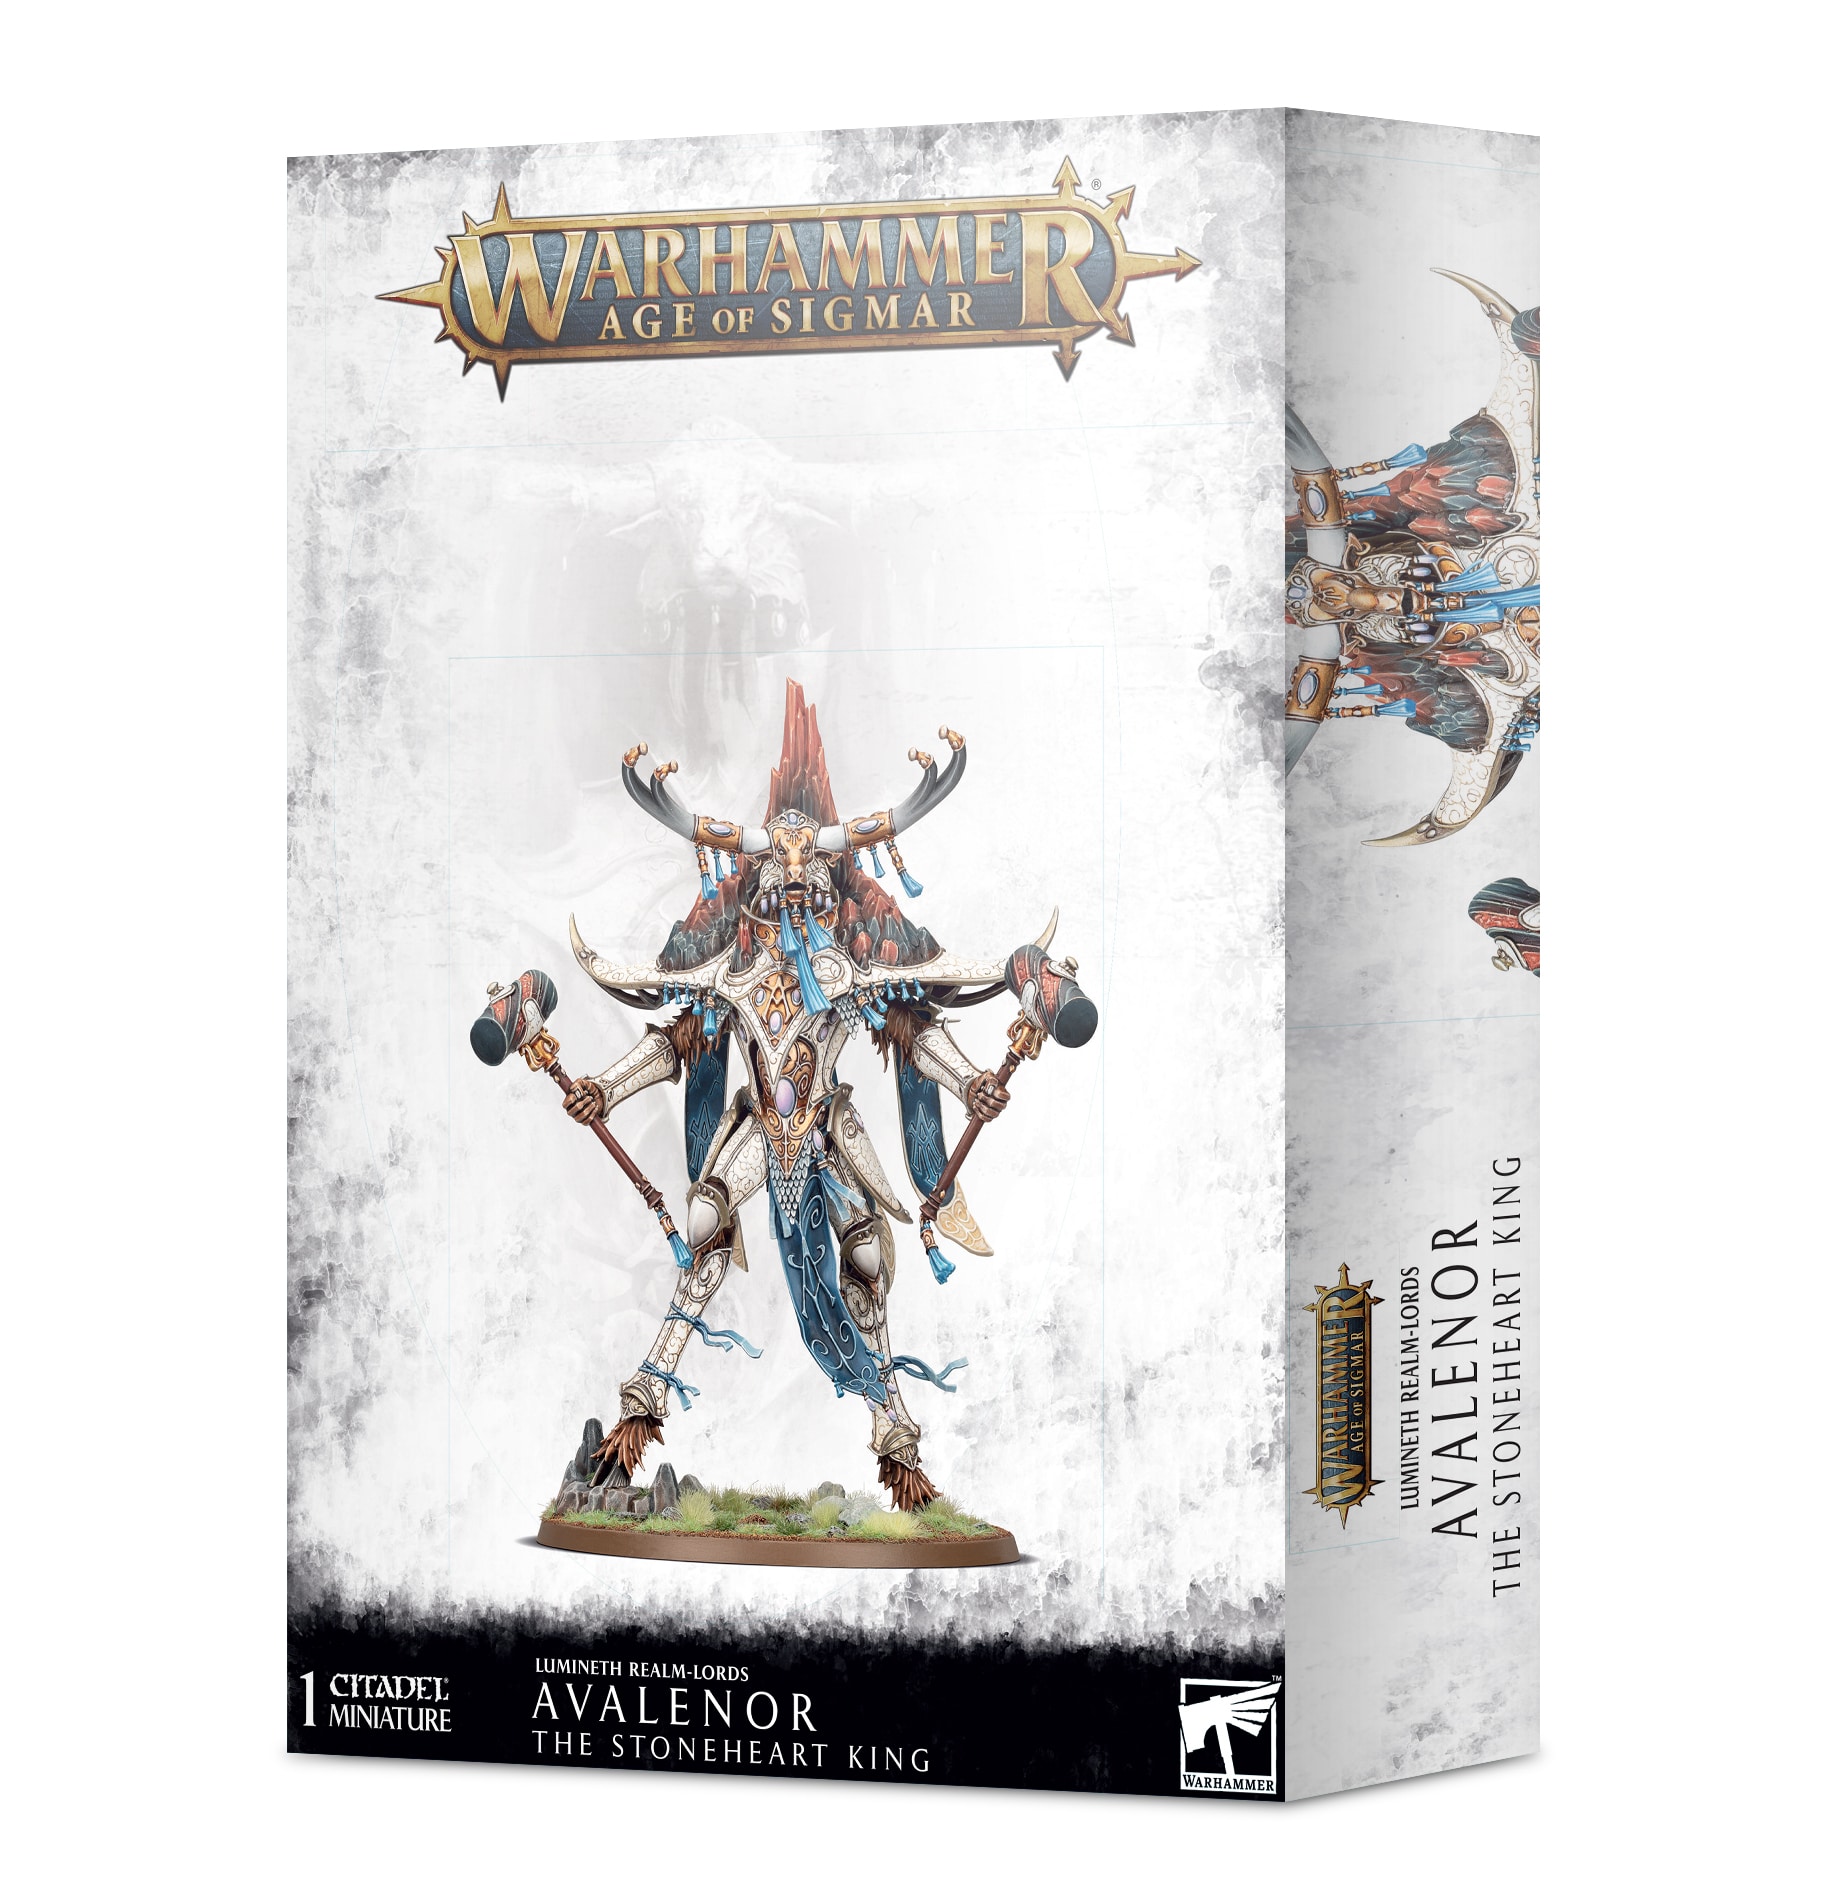 Warhammer Age of Sigmar: Lumineth Realm-lords: Avalenor The Stoneheart King 